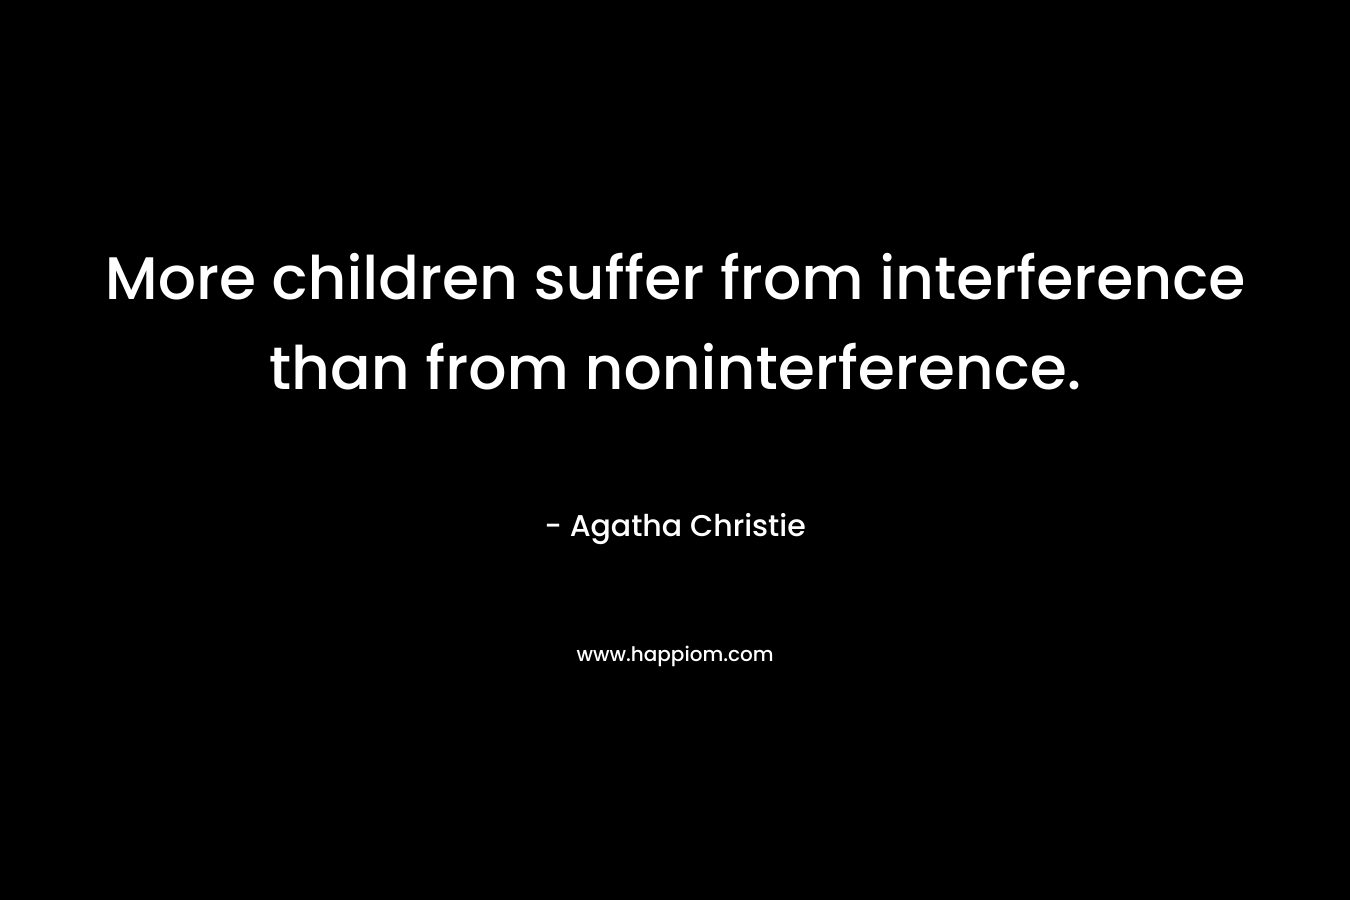 More children suffer from interference than from noninterference.